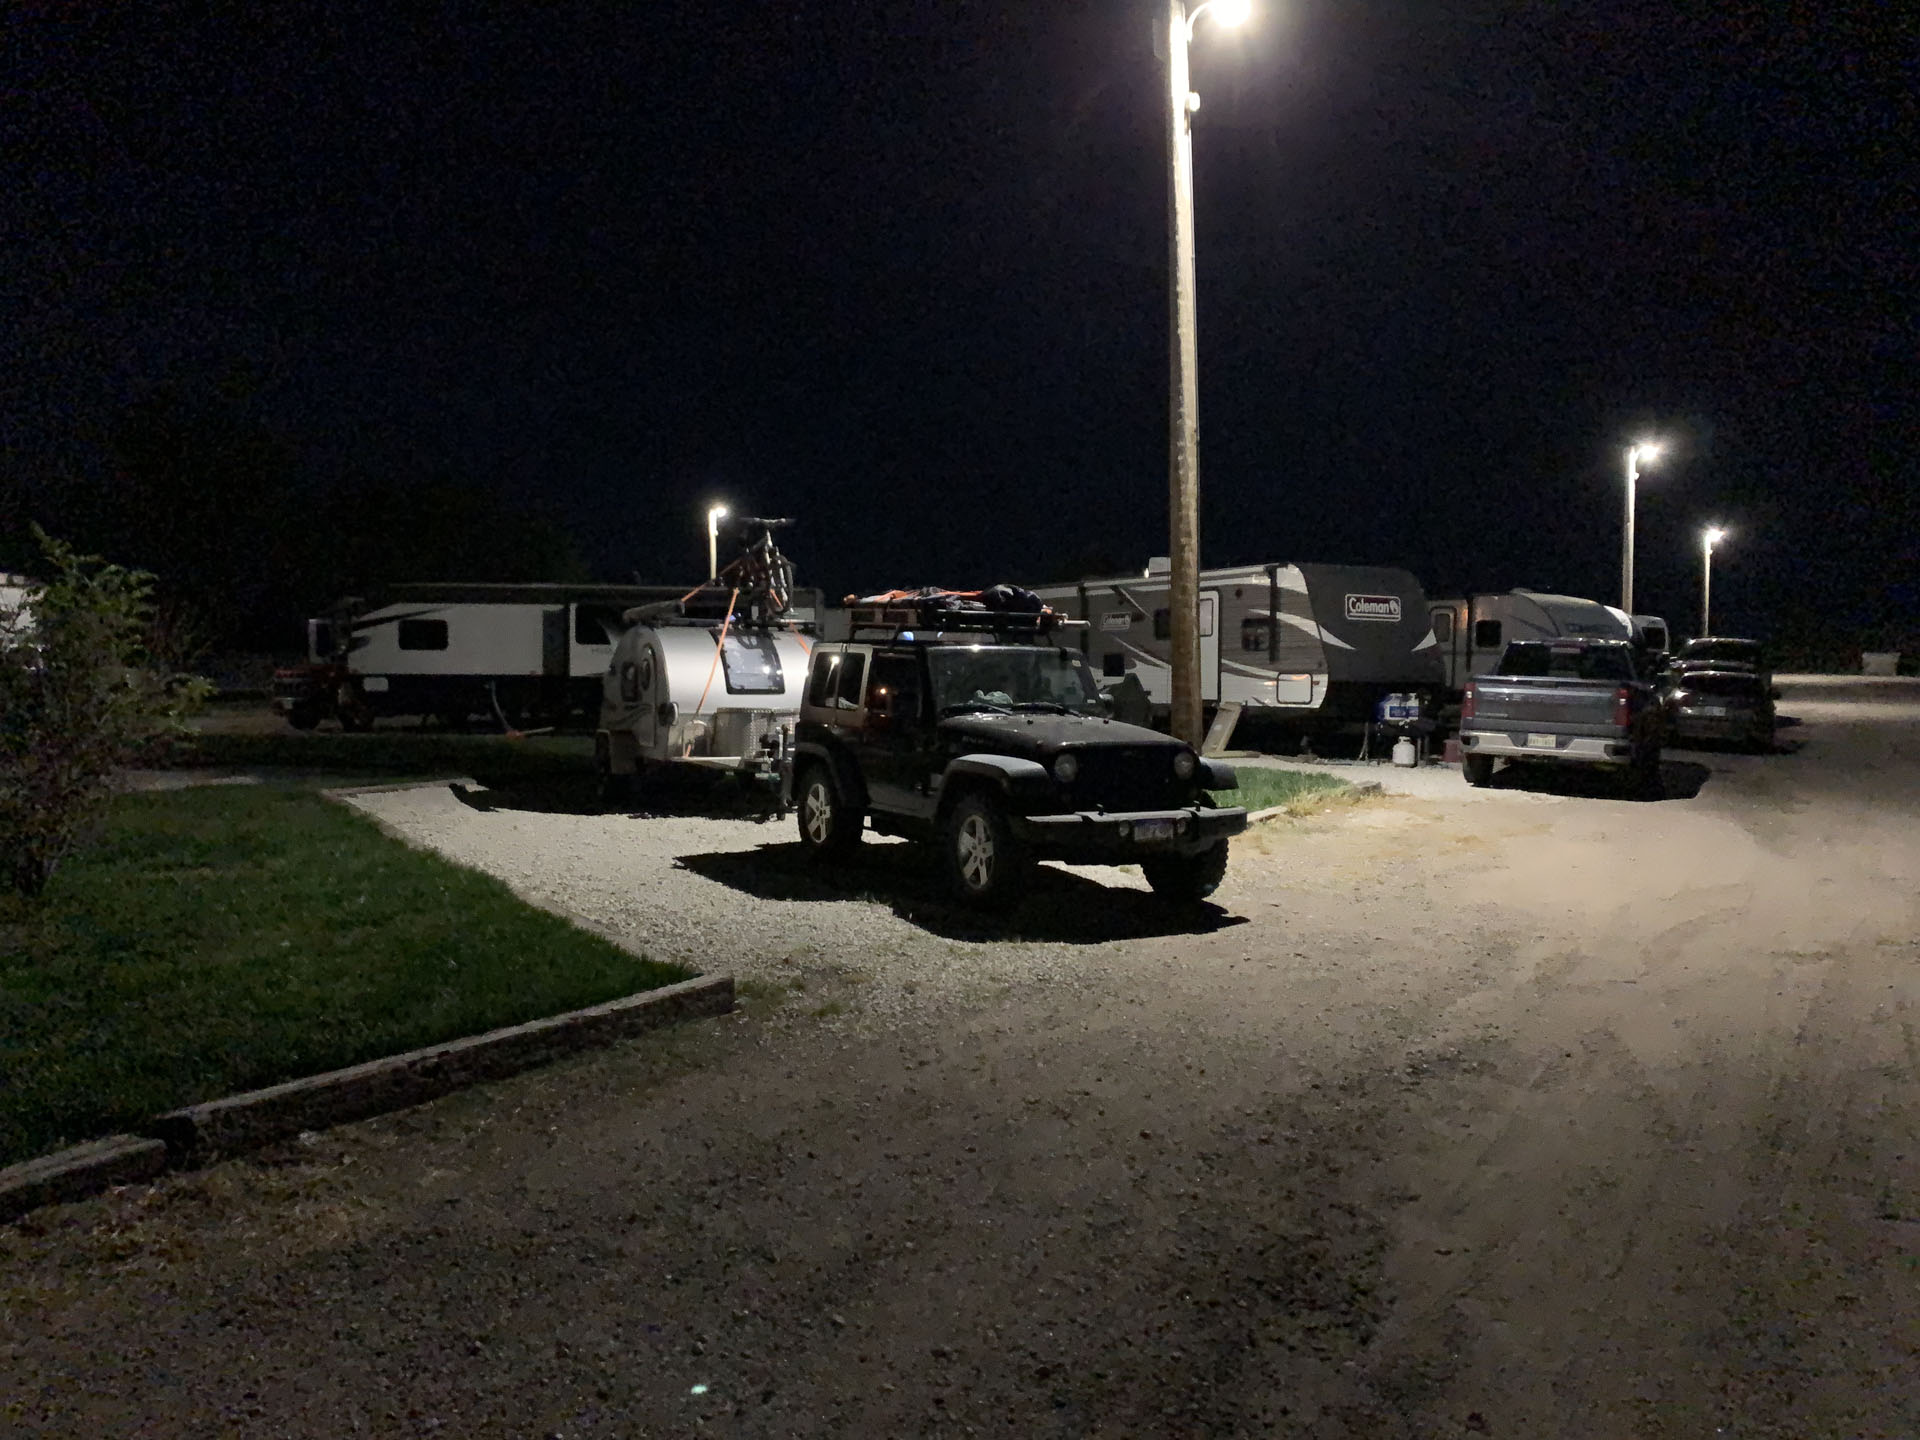 Two Cimmeron RVs parked in a gravel lot at night.